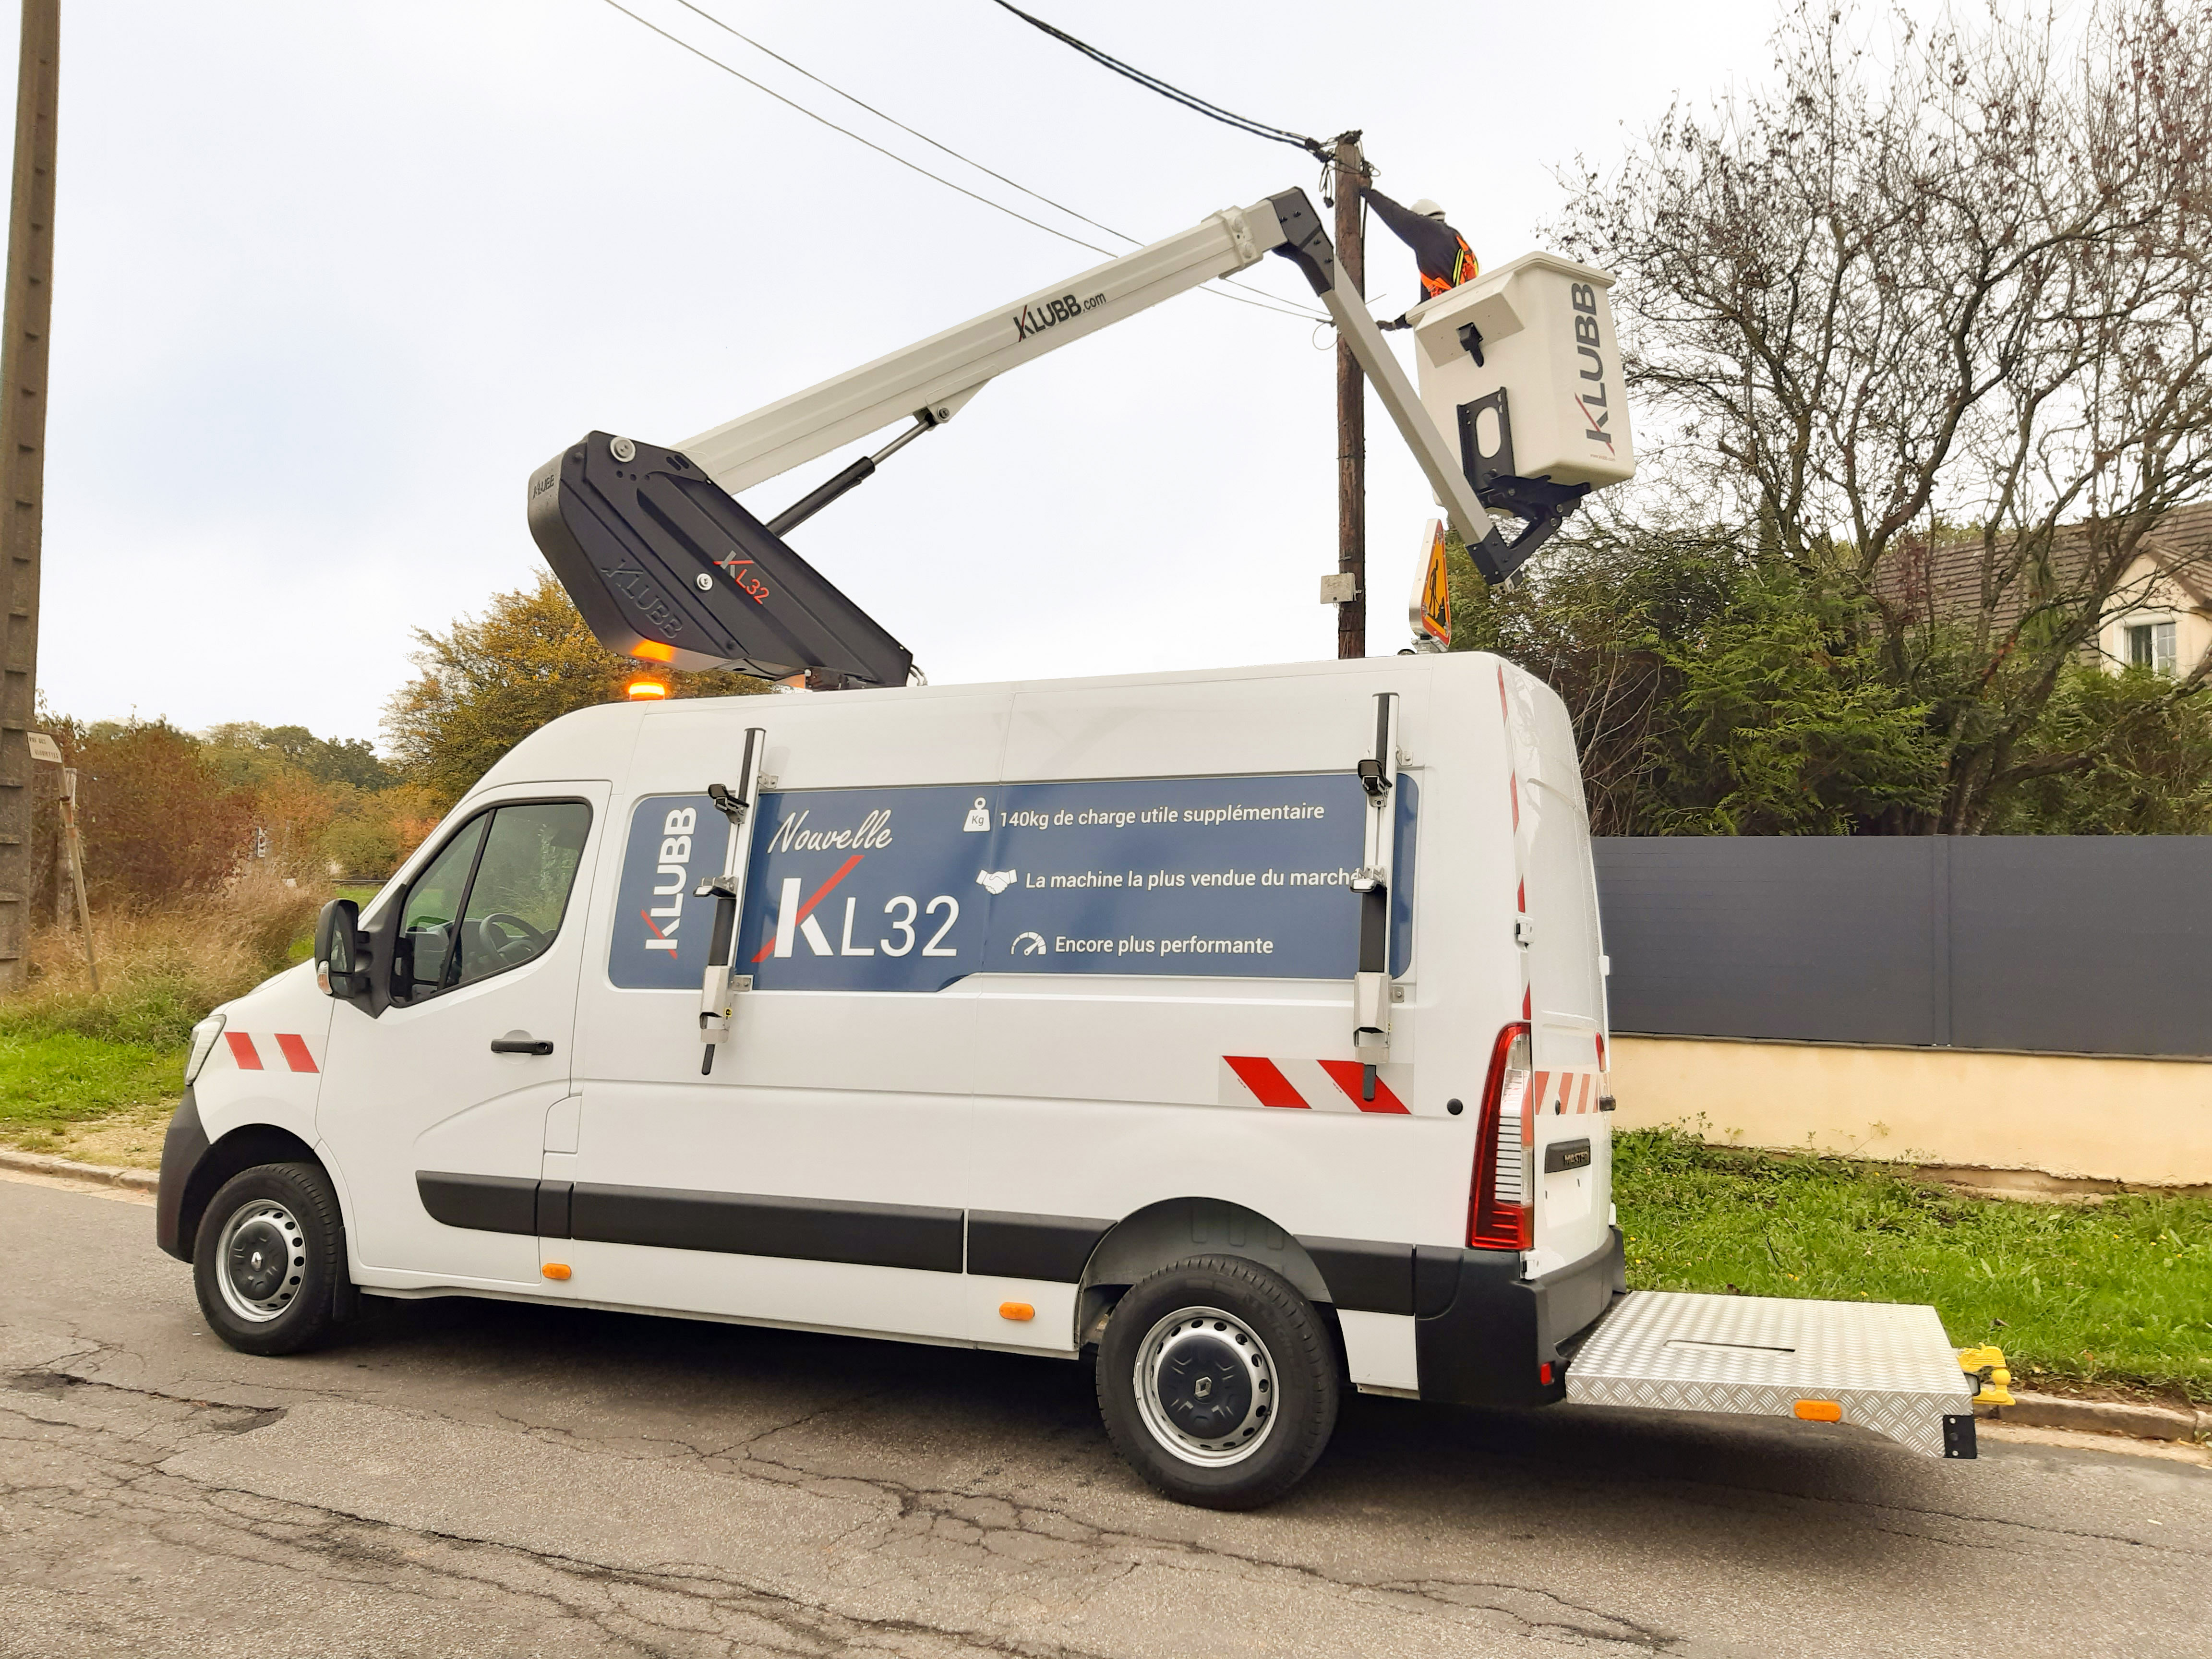 A significant gain in payload with the Klubb aerial work platform light range!